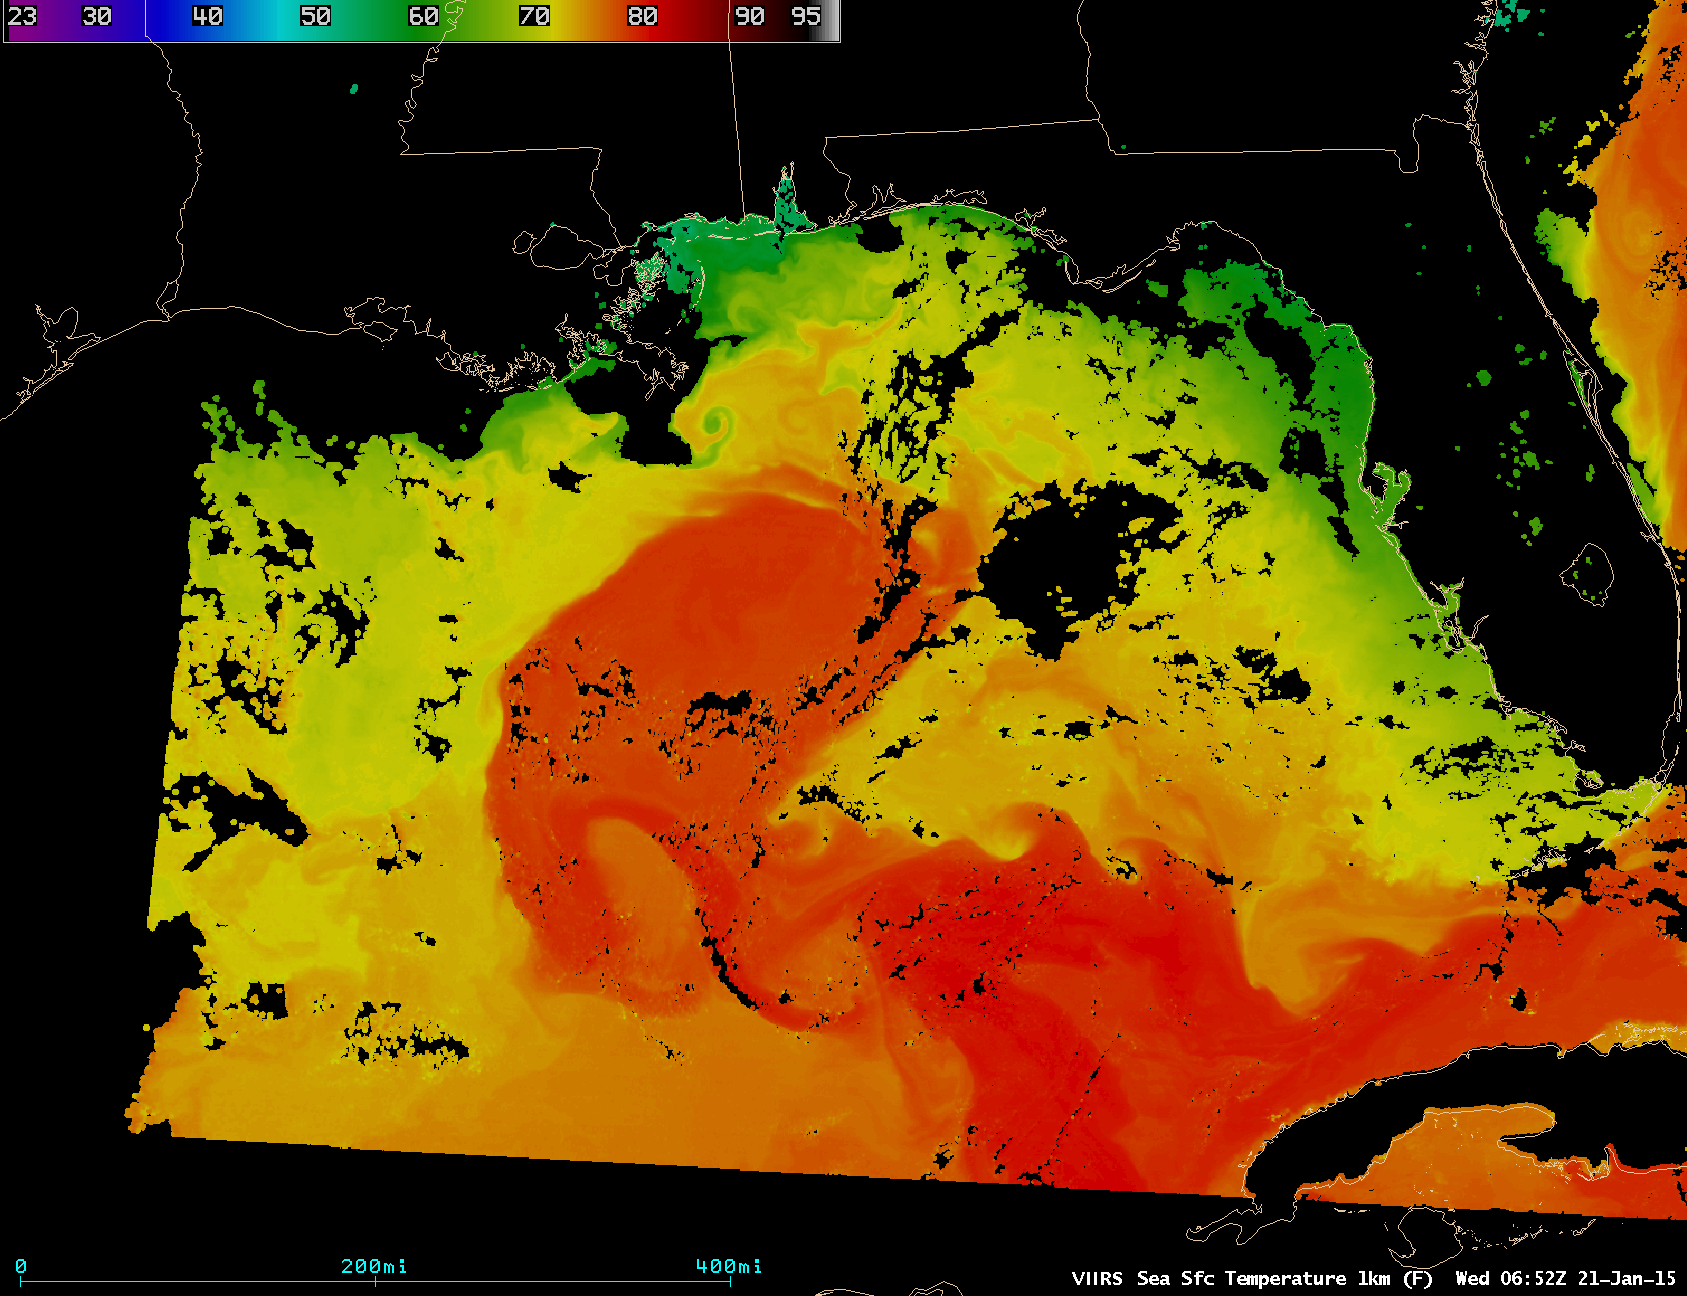 Suomi NPP VIIRS Sea Surface Temperature (SST) product